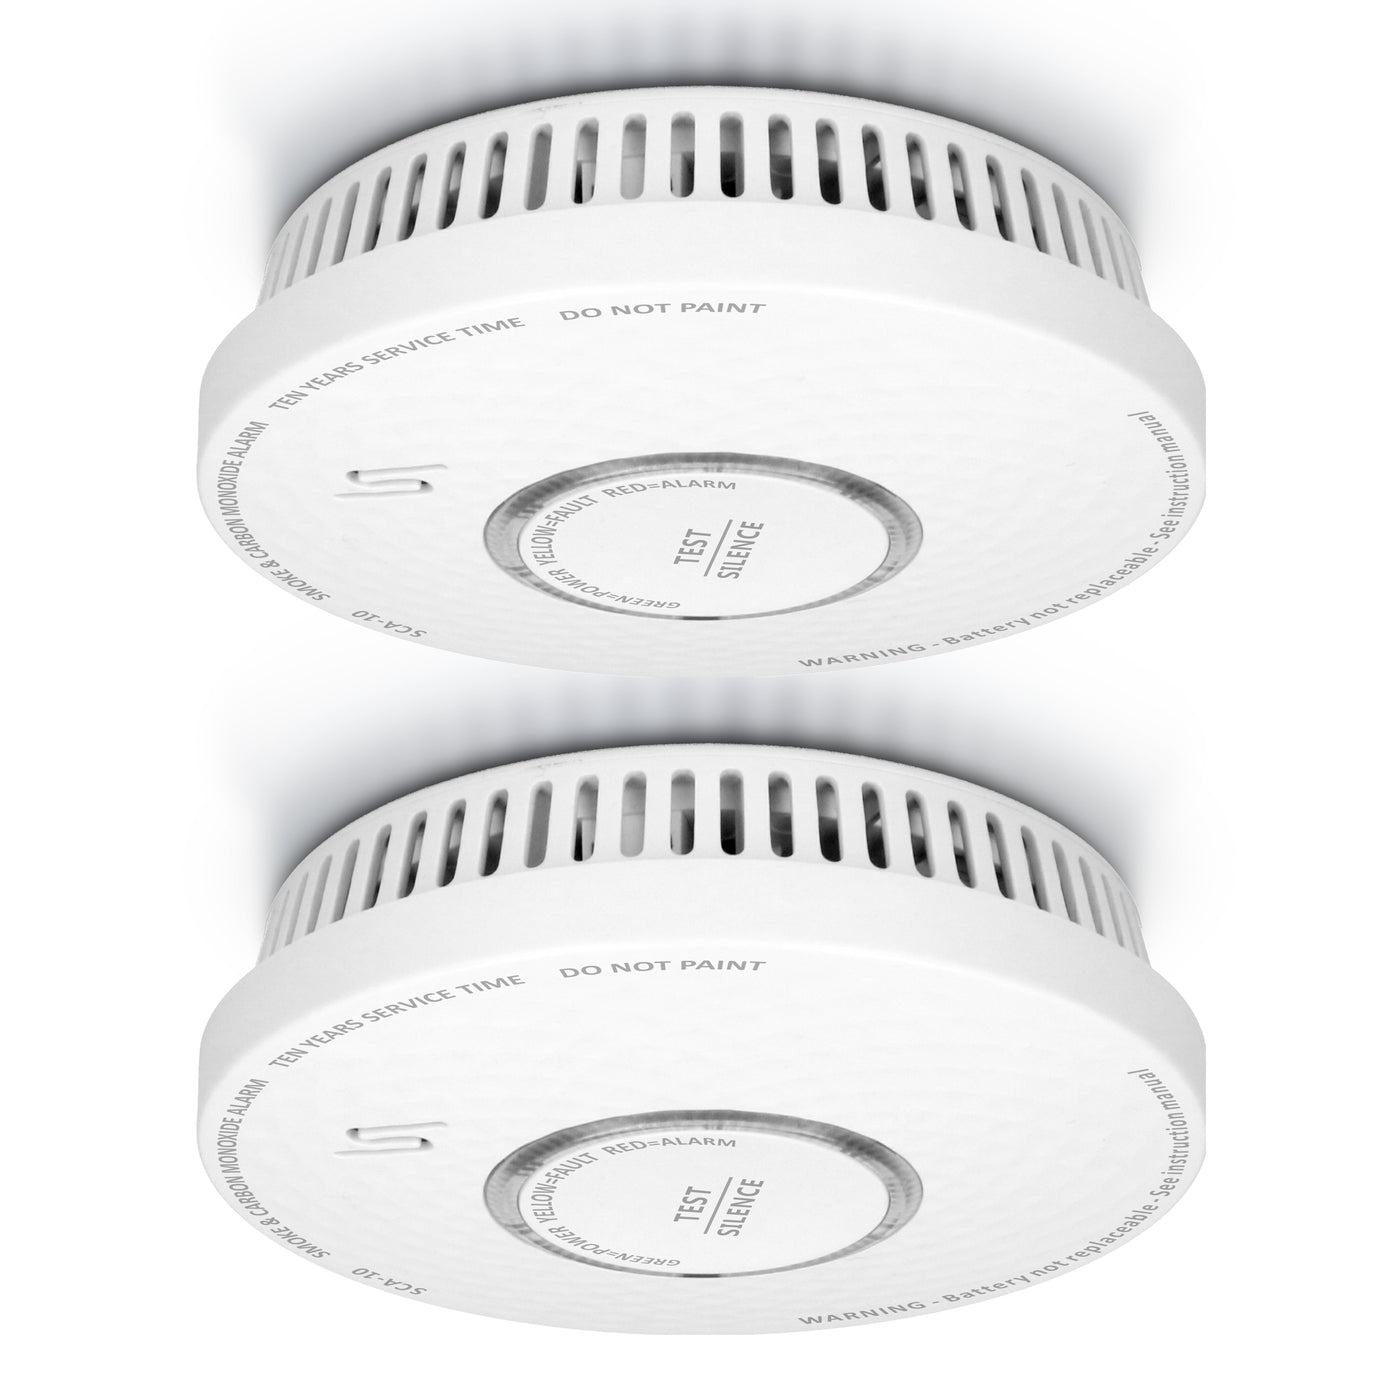 Alecto SCA-10 2x - Smoke and carbon monoxide alarm pack, 2 pack